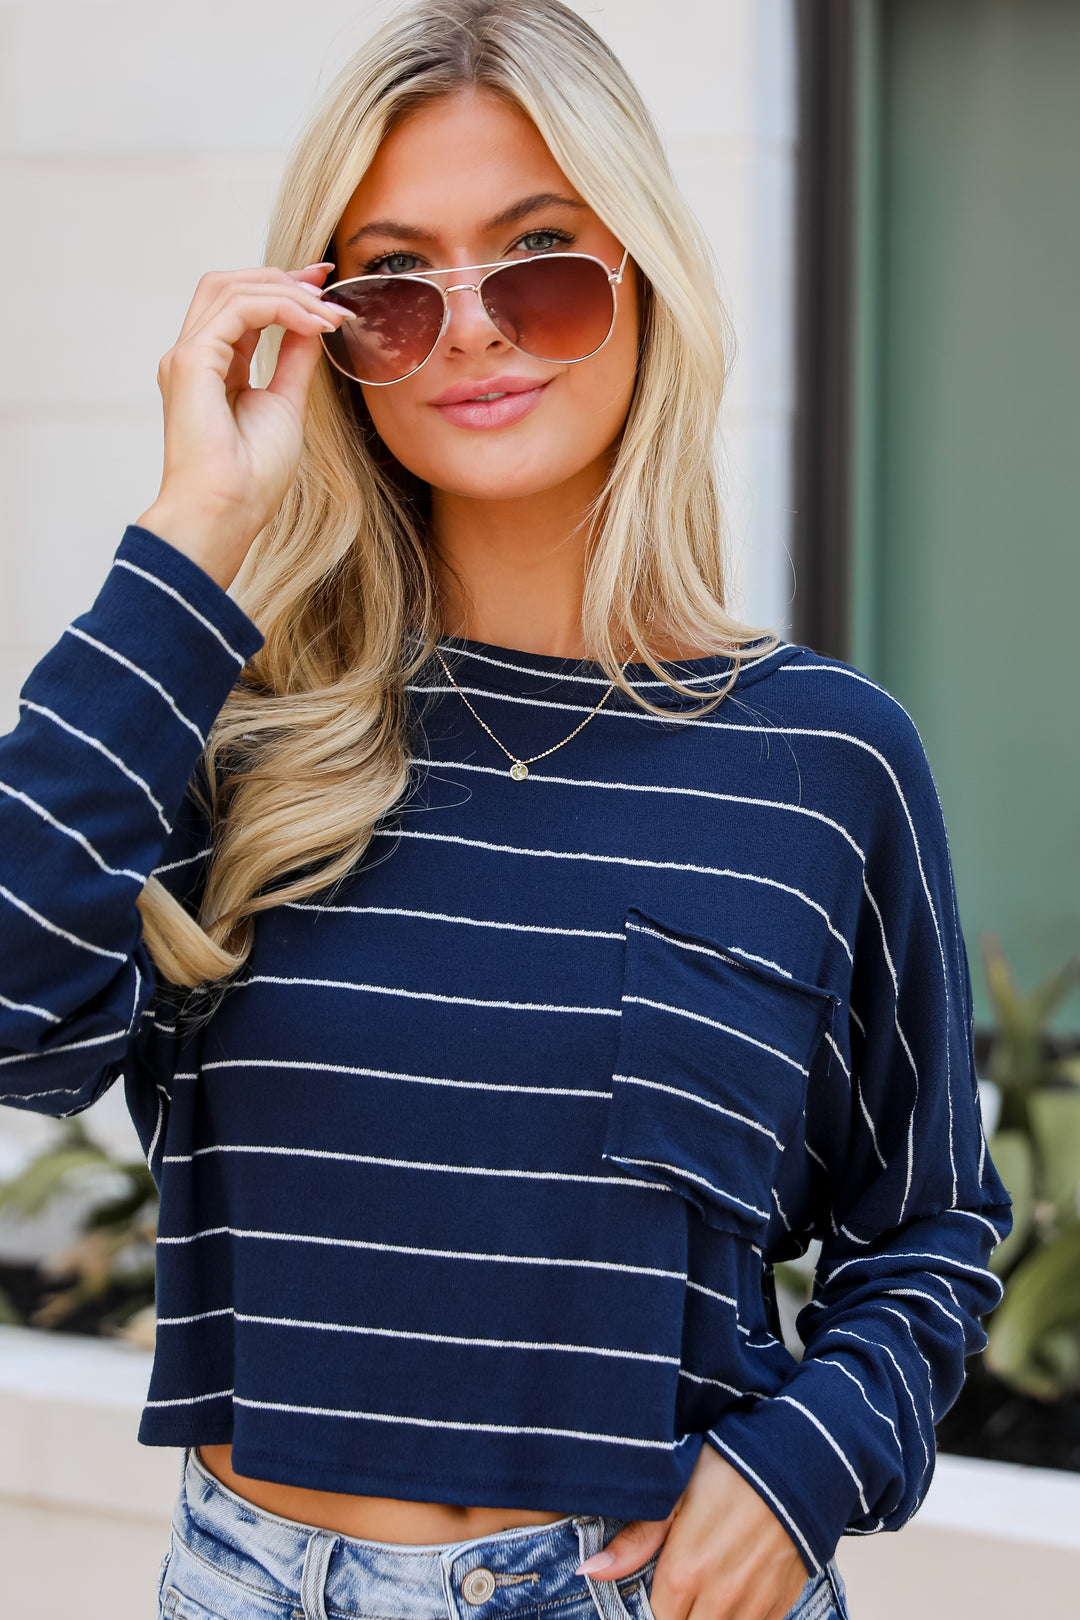 Cute Necessity Navy Striped Knit Top